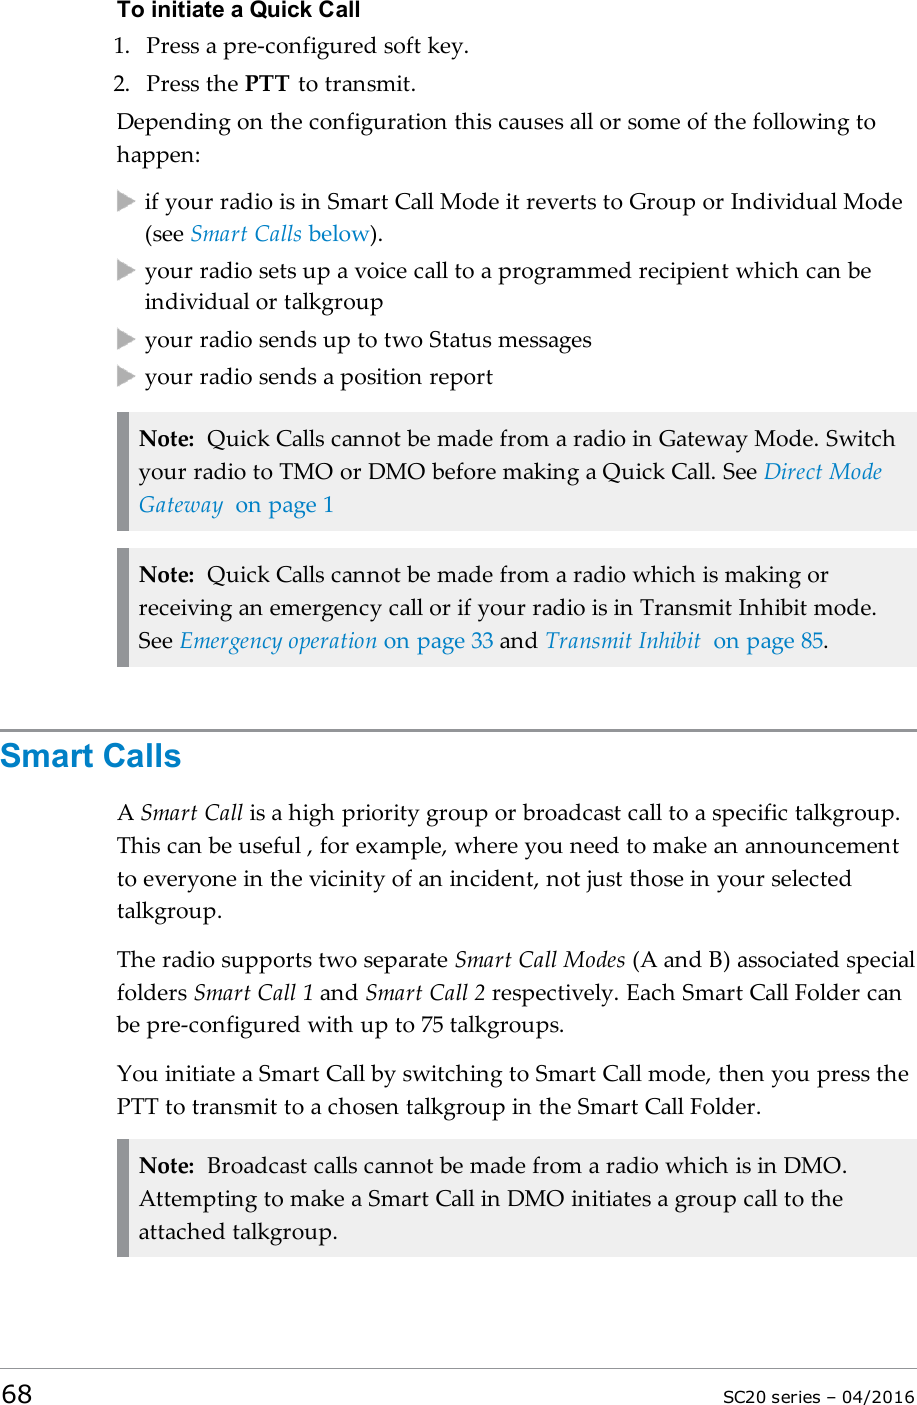 To initiate a Quick Call1. Press a pre-configured soft key.2. Press the PTT to transmit.Depending on the configuration this causes all or some of the following tohappen:if your radio is in Smart Call Mode it reverts to Group or Individual Mode(see Smart Calls below).your radio sets up a voice call to a programmed recipient which can beindividual or talkgroupyour radio sends up to two Status messagesyour radio sends a position reportNote: Quick Calls cannot be made from a radio in Gateway Mode. Switchyour radio to TMO or DMO before making a Quick Call. See Direct ModeGateway on page 1Note: Quick Calls cannot be made from a radio which is making orreceiving an emergency call or if your radio is in Transmit Inhibit mode.See Emergency operation on page 33 and Transmit Inhibit on page 85.Smart CallsASmart Call is a high priority group or broadcast call to a specific talkgroup.This can be useful , for example, where you need to make an announcementto everyone in the vicinity of an incident, not just those in your selectedtalkgroup.The radio supports two separate Smart Call Modes (A and B) associated specialfolders Smart Call 1 and Smart Call 2 respectively. Each Smart Call Folder canbe pre-configured with up to 75 talkgroups.You initiate a Smart Call by switching to Smart Call mode, then you press thePTT to transmit to a chosen talkgroup in the Smart Call Folder.Note: Broadcast calls cannot be made from a radio which is in DMO.Attempting to make a Smart Call in DMO initiates a group call to theattached talkgroup.68 SC20 series – 04/2016